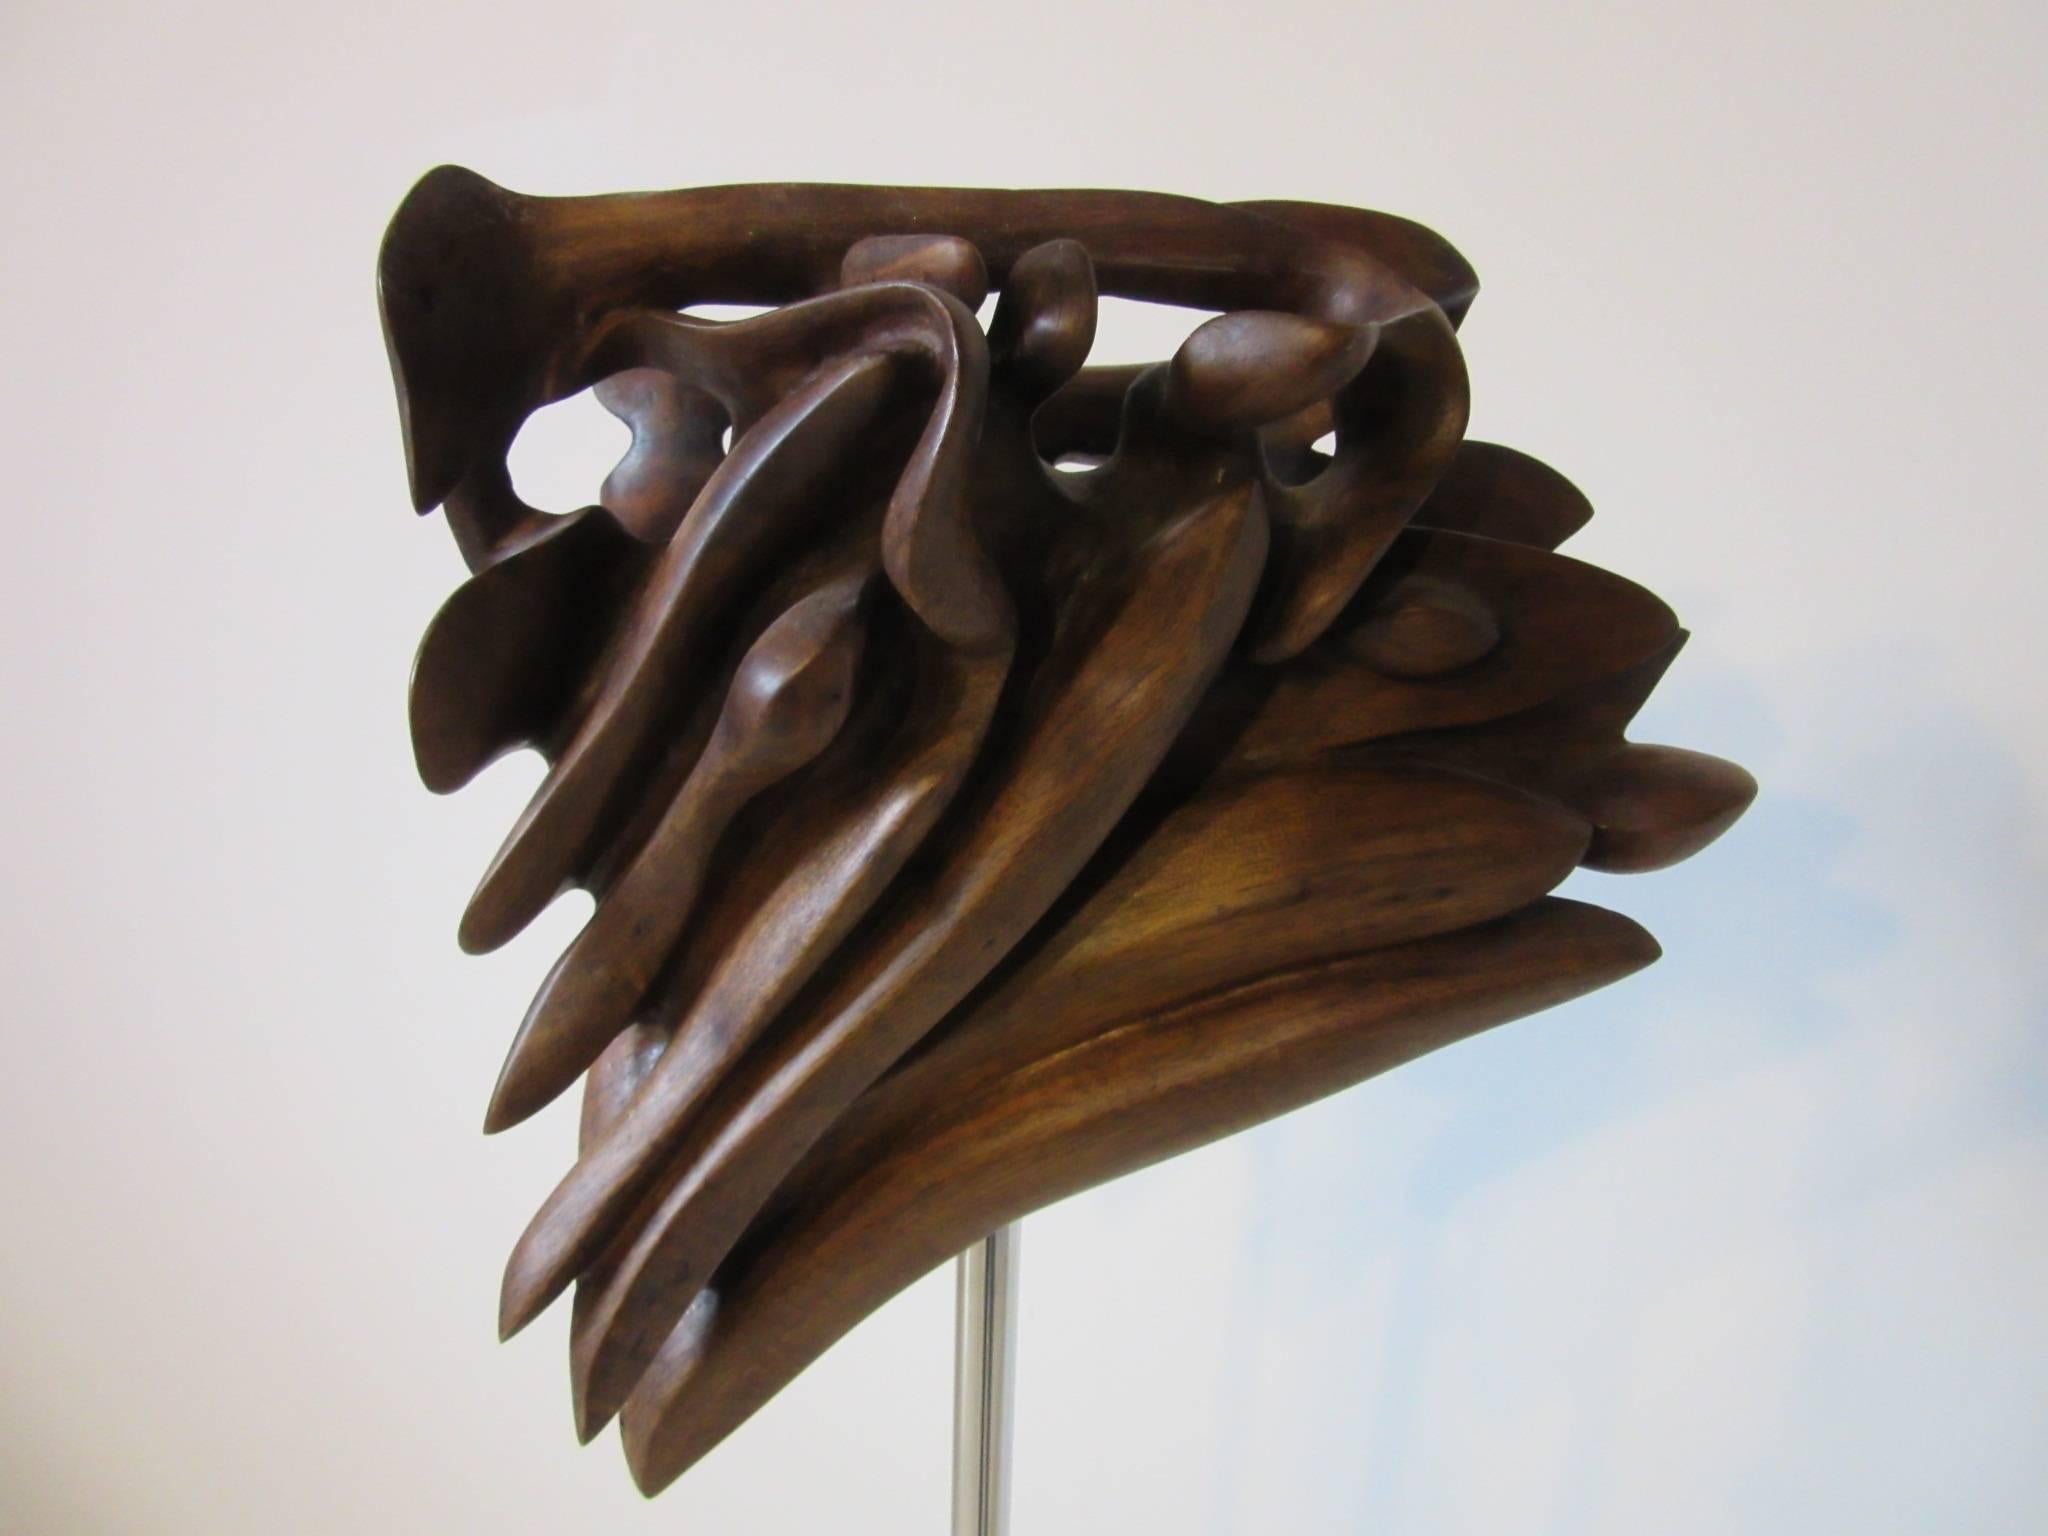 A carved walnut sculpture displayed on a chrome, black and white Lucite base mixing hard surfaces and the organic sculptural texture of the wood . Carved artist signature to the walnut 